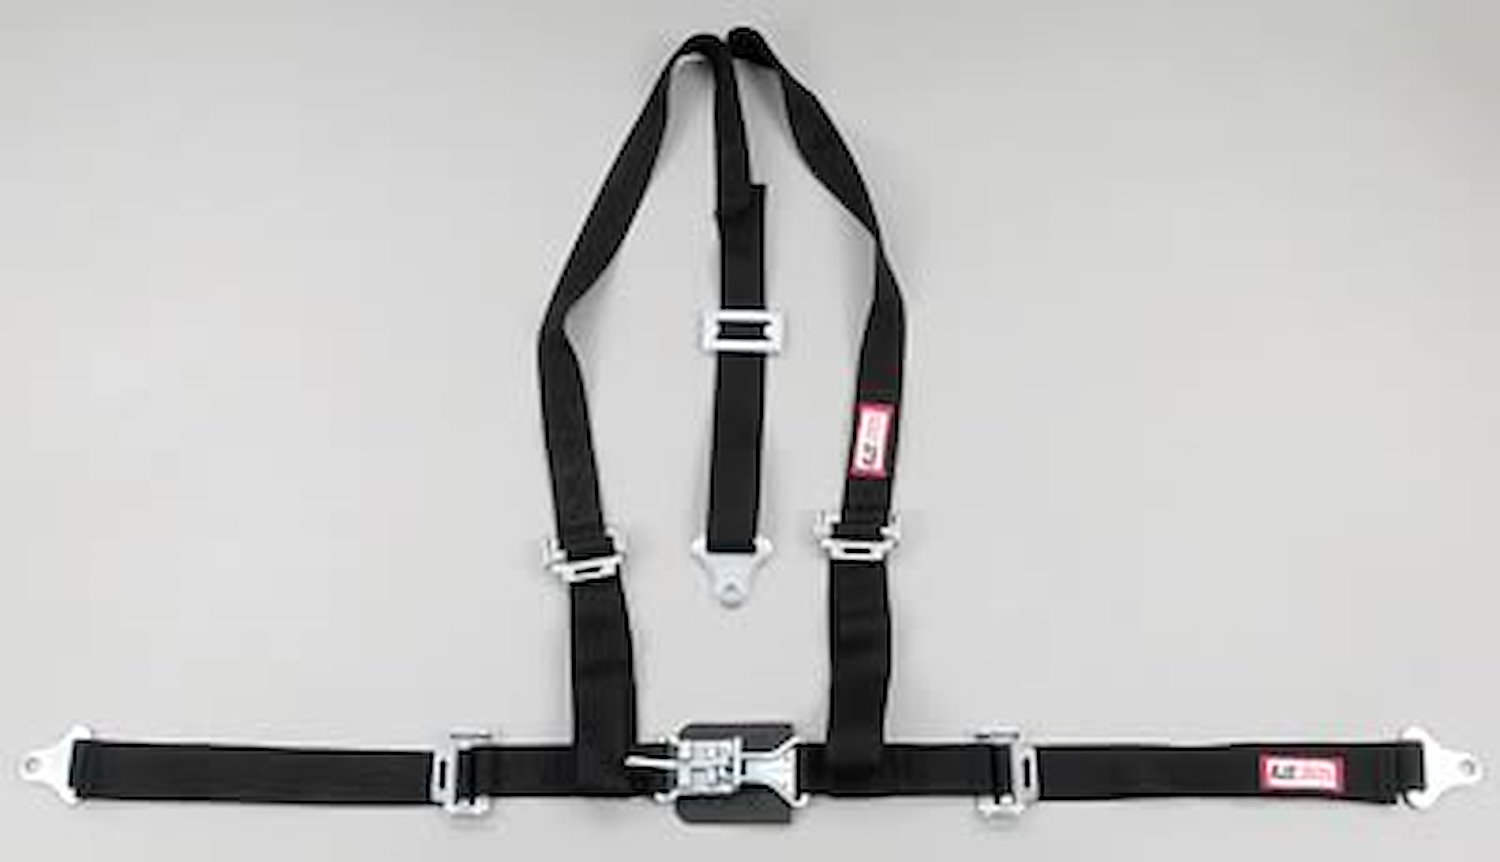 NON-SFI L&L HARNESS 2 PULL DOWN Lap Belt w/adjuster 2 S.H. V ROLL BAR Mount ALL SNAP ENDS BLUE